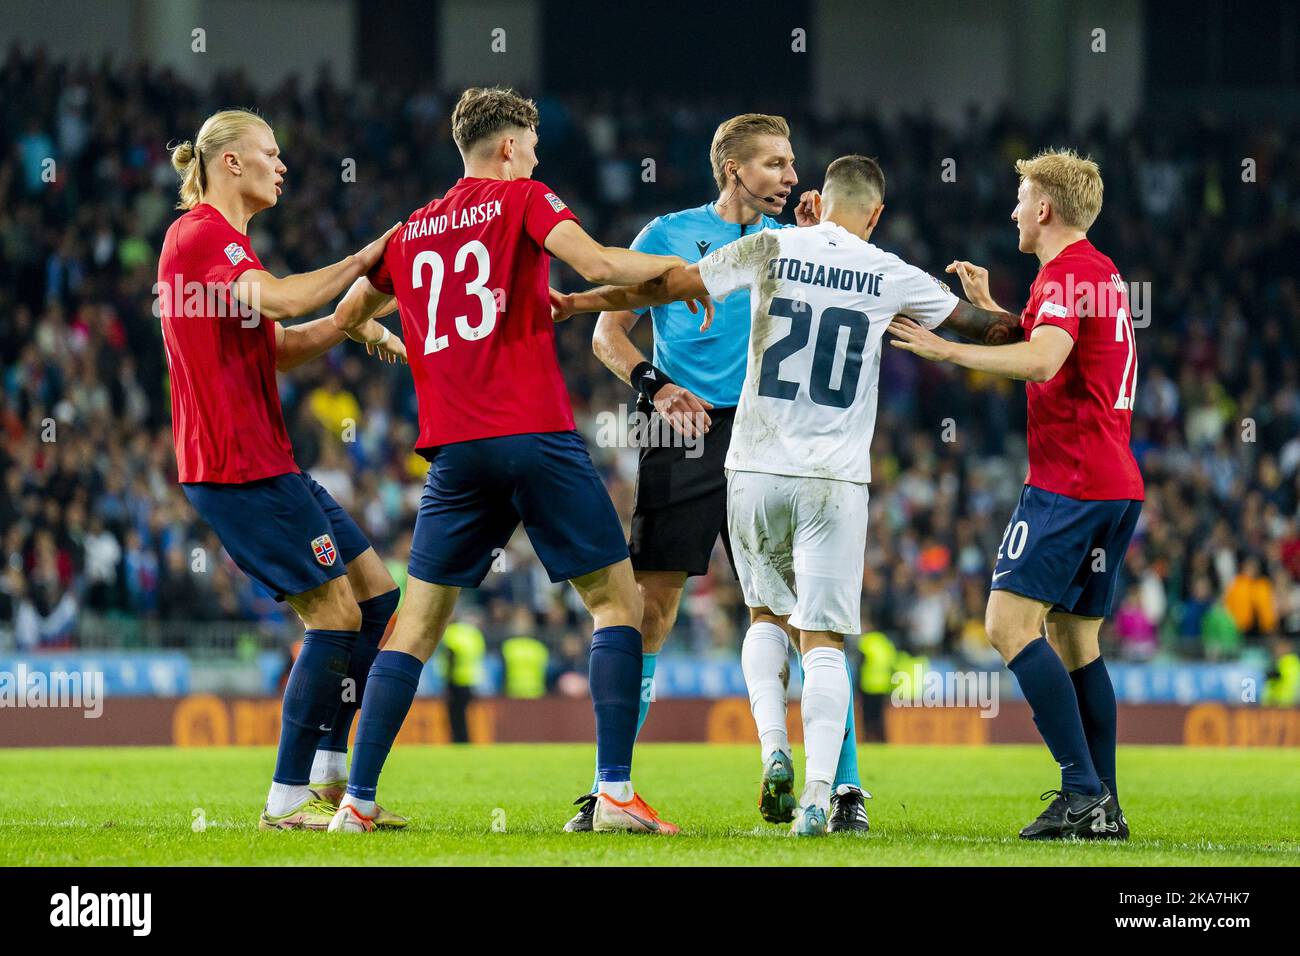 Ljubljana, Slovenia 20220924. Norway's Erling Braut Haaland, JÃ¸rgen Strand Larsen and Mats MÃ¸ller DÃ¦hli discuss with referee Lawrence Visser and Slovenia's Petar Stojanovic during the Nations League football match between Slovenia and Norway at Stozice Stadium. Photo: Fredrik Varfjell / NTB  Stock Photo